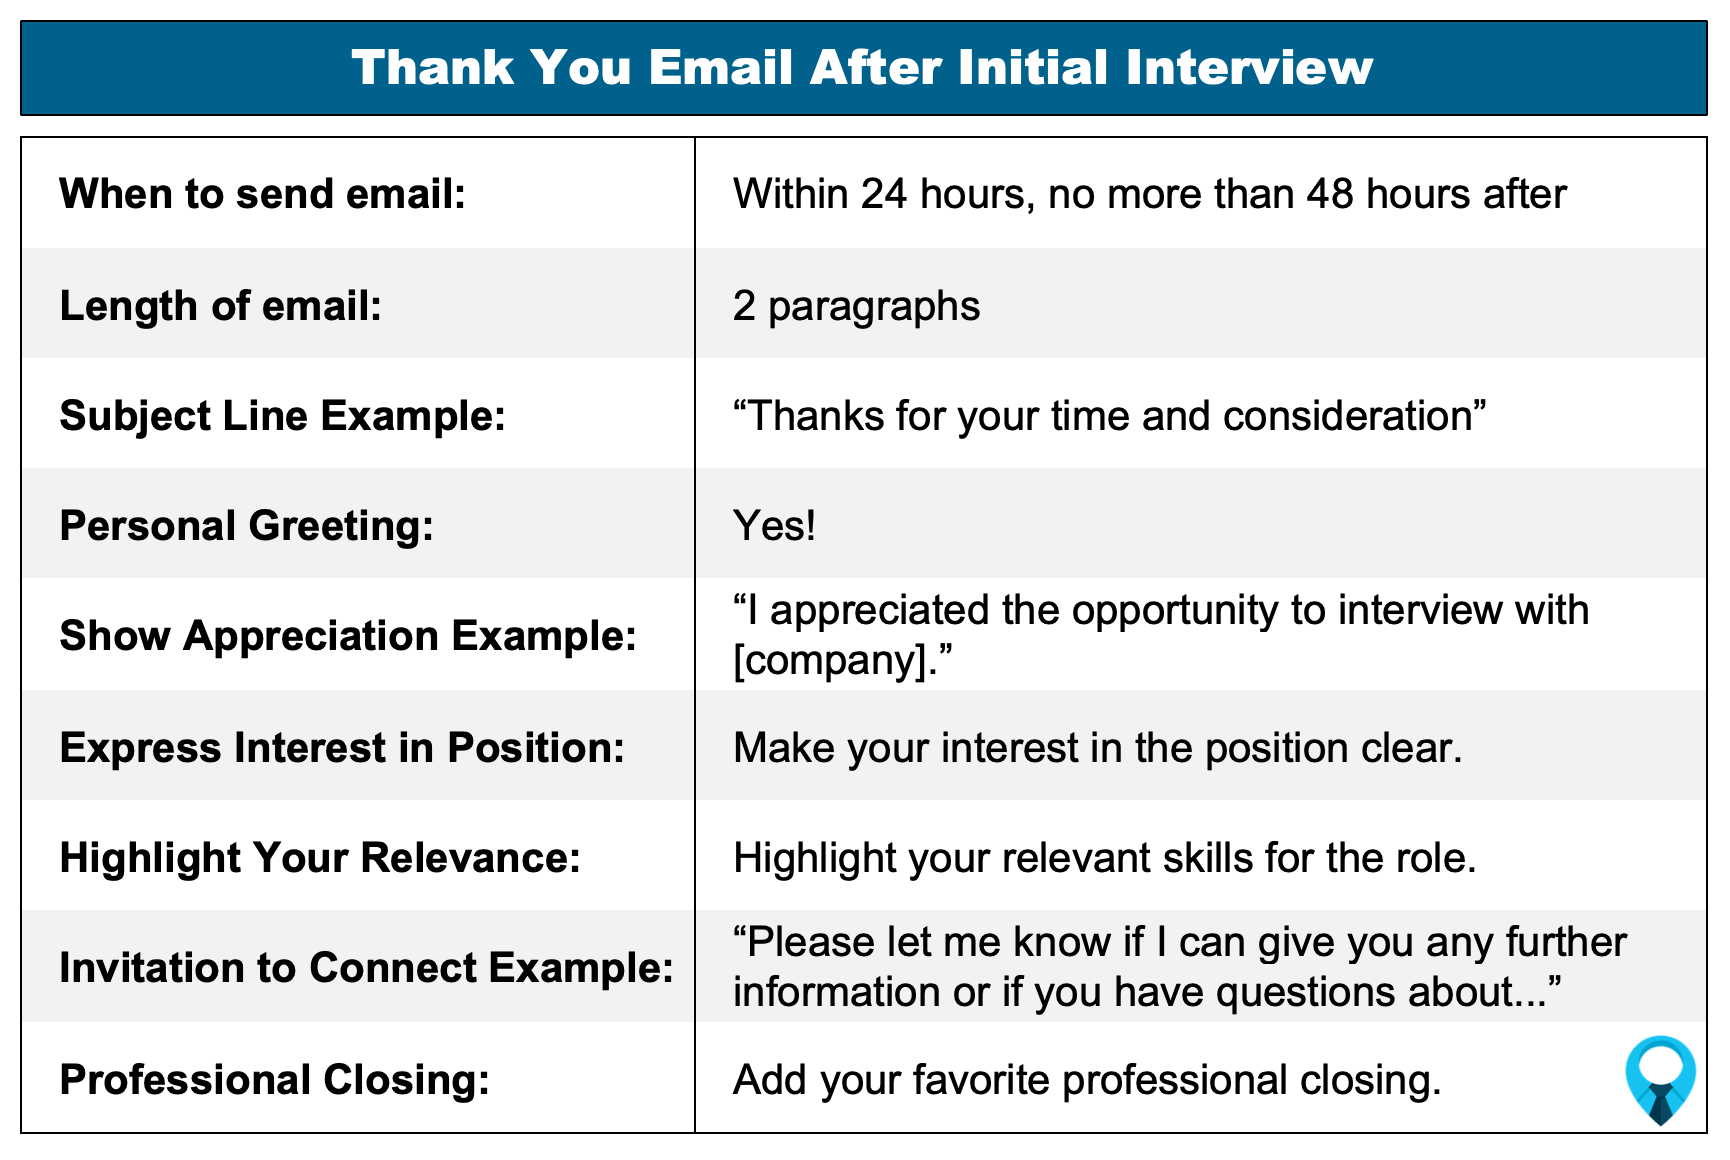 Thank You Email After Initial Interview